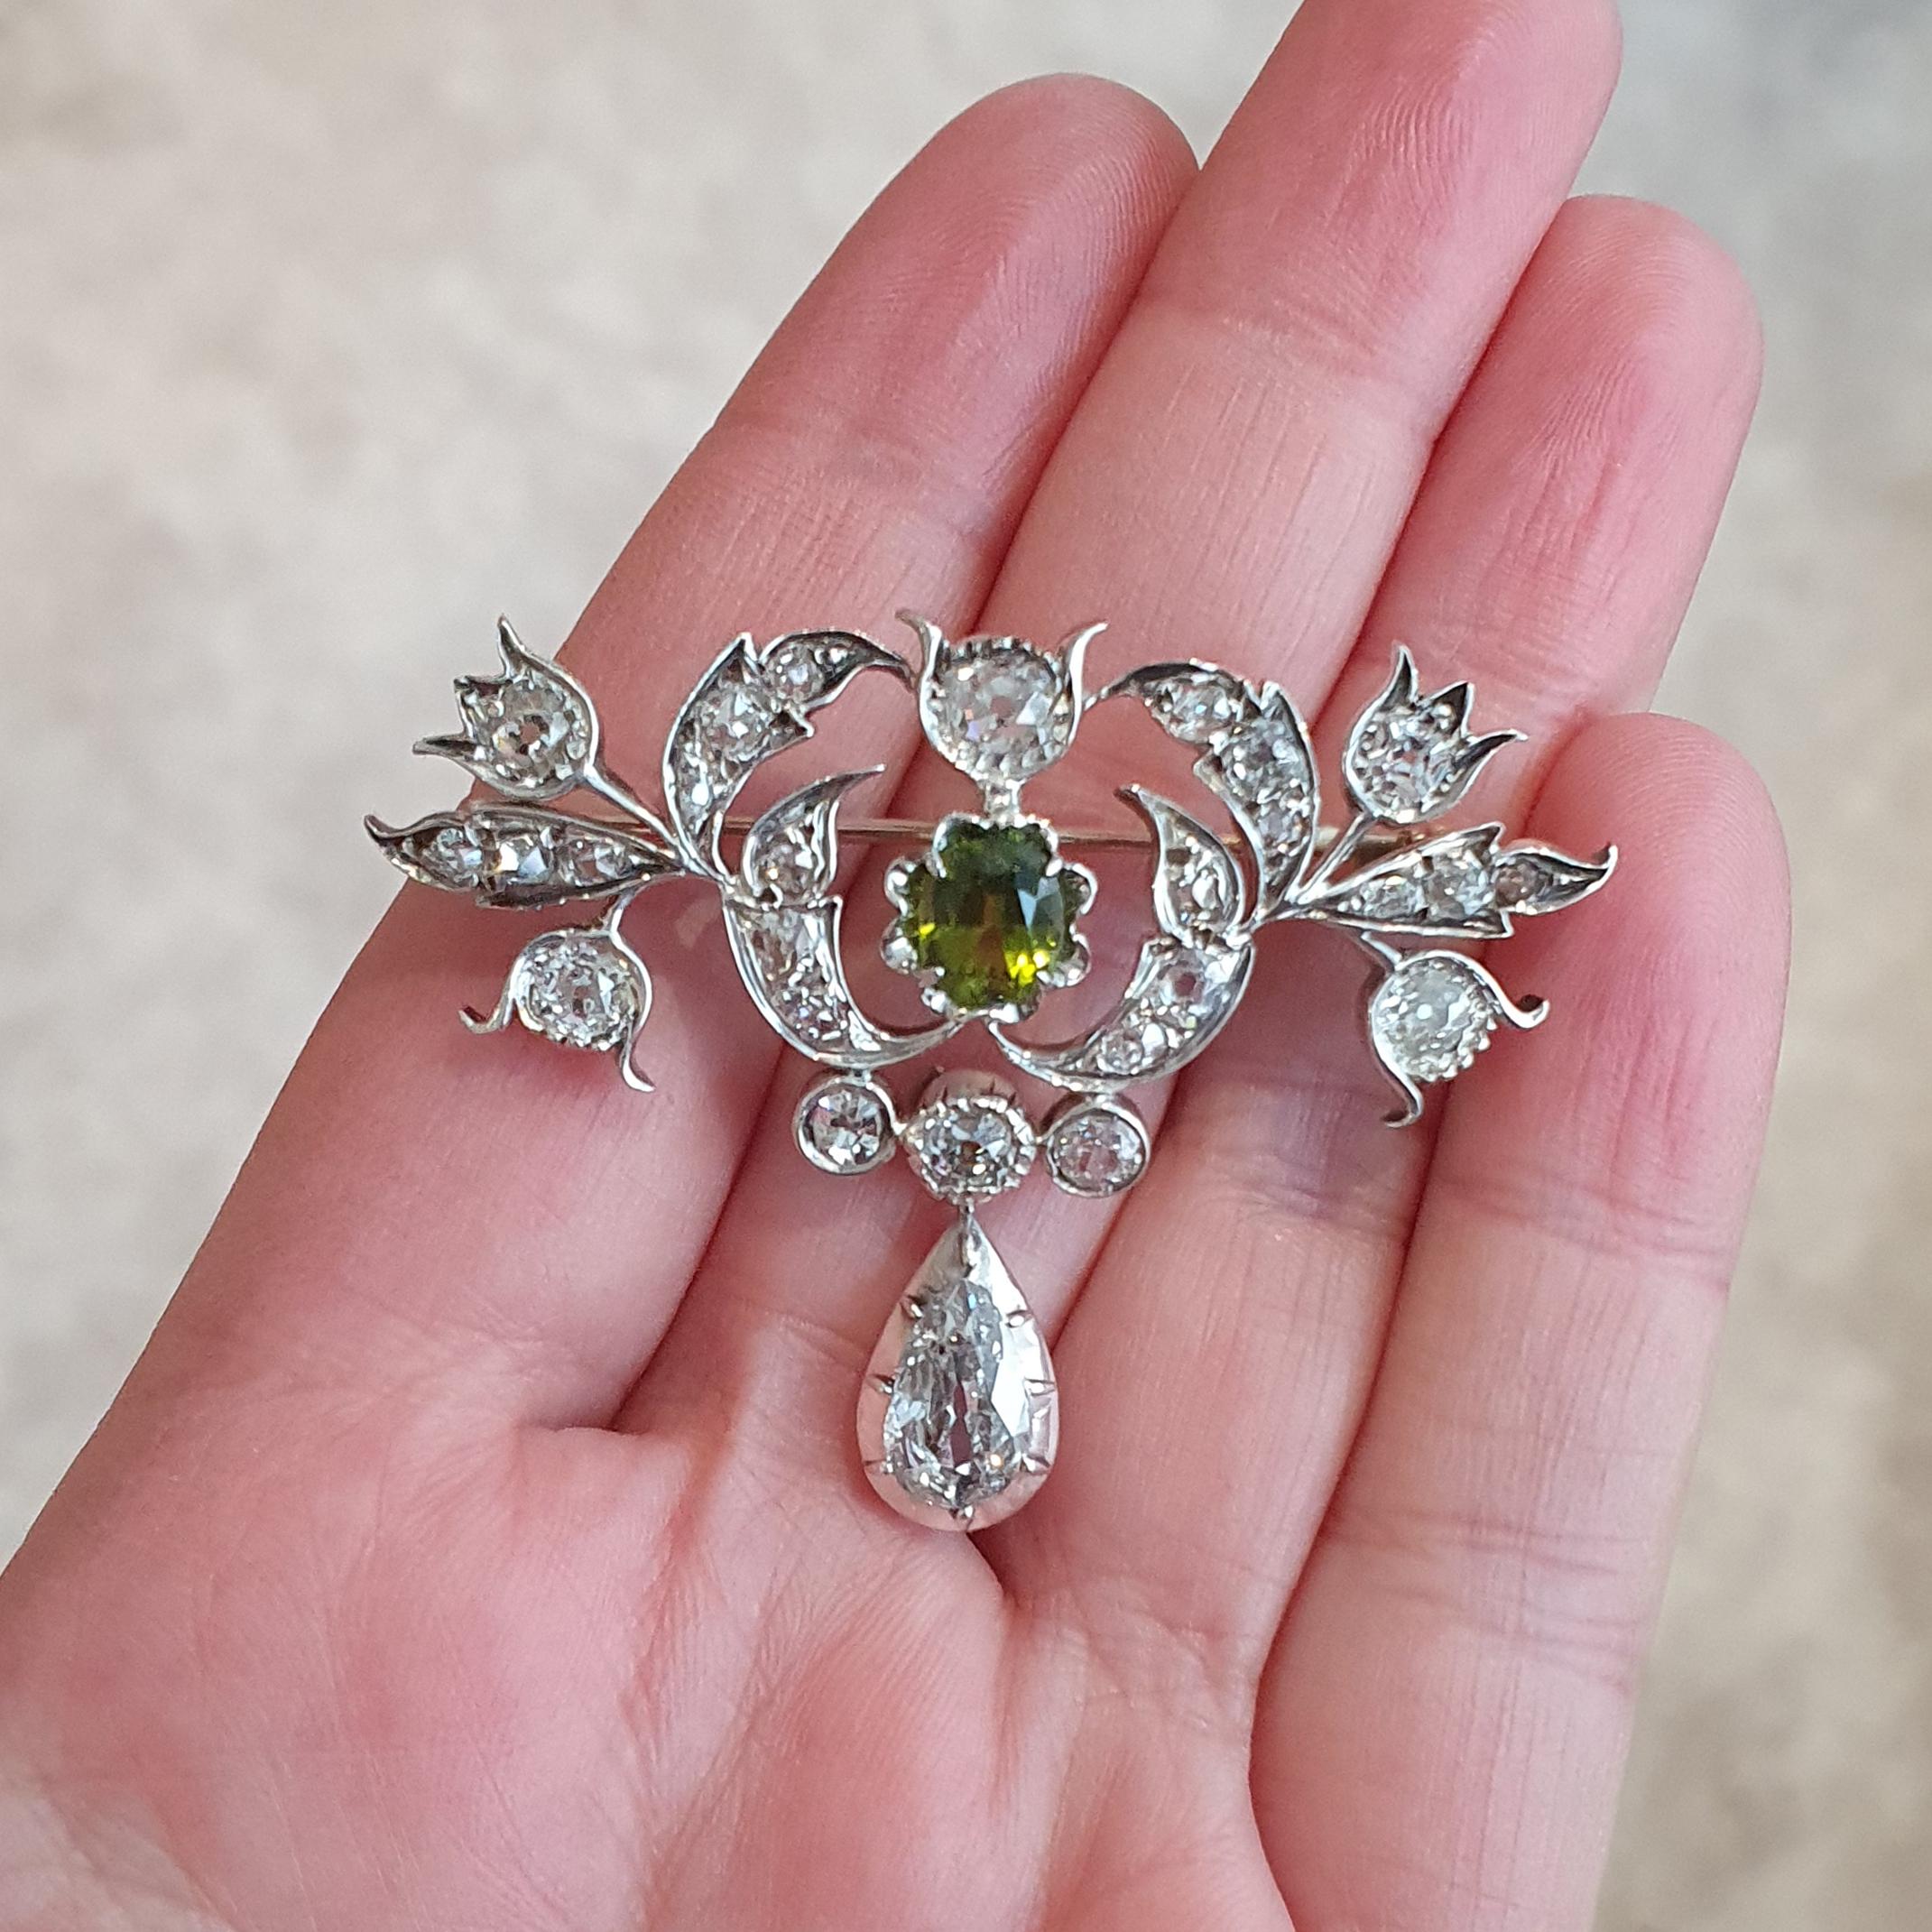 Antique Diamond and Peridot Brooch Pendant Late 19th Century For Sale 6